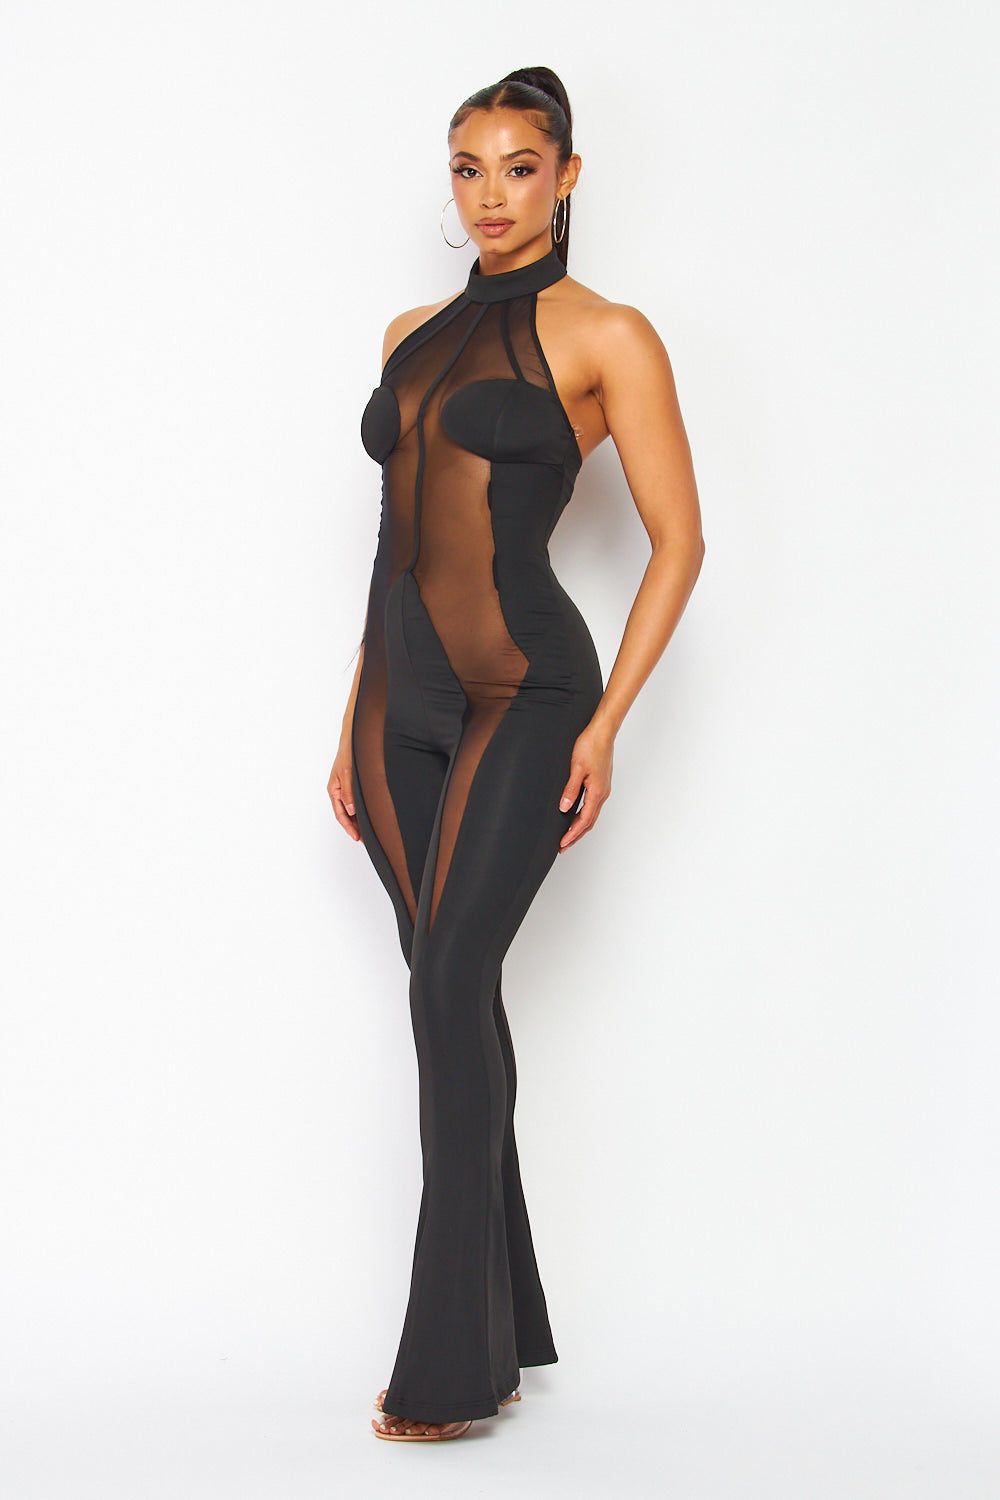 Nothing Personal Partially Sheer Mesh Jumpsuit